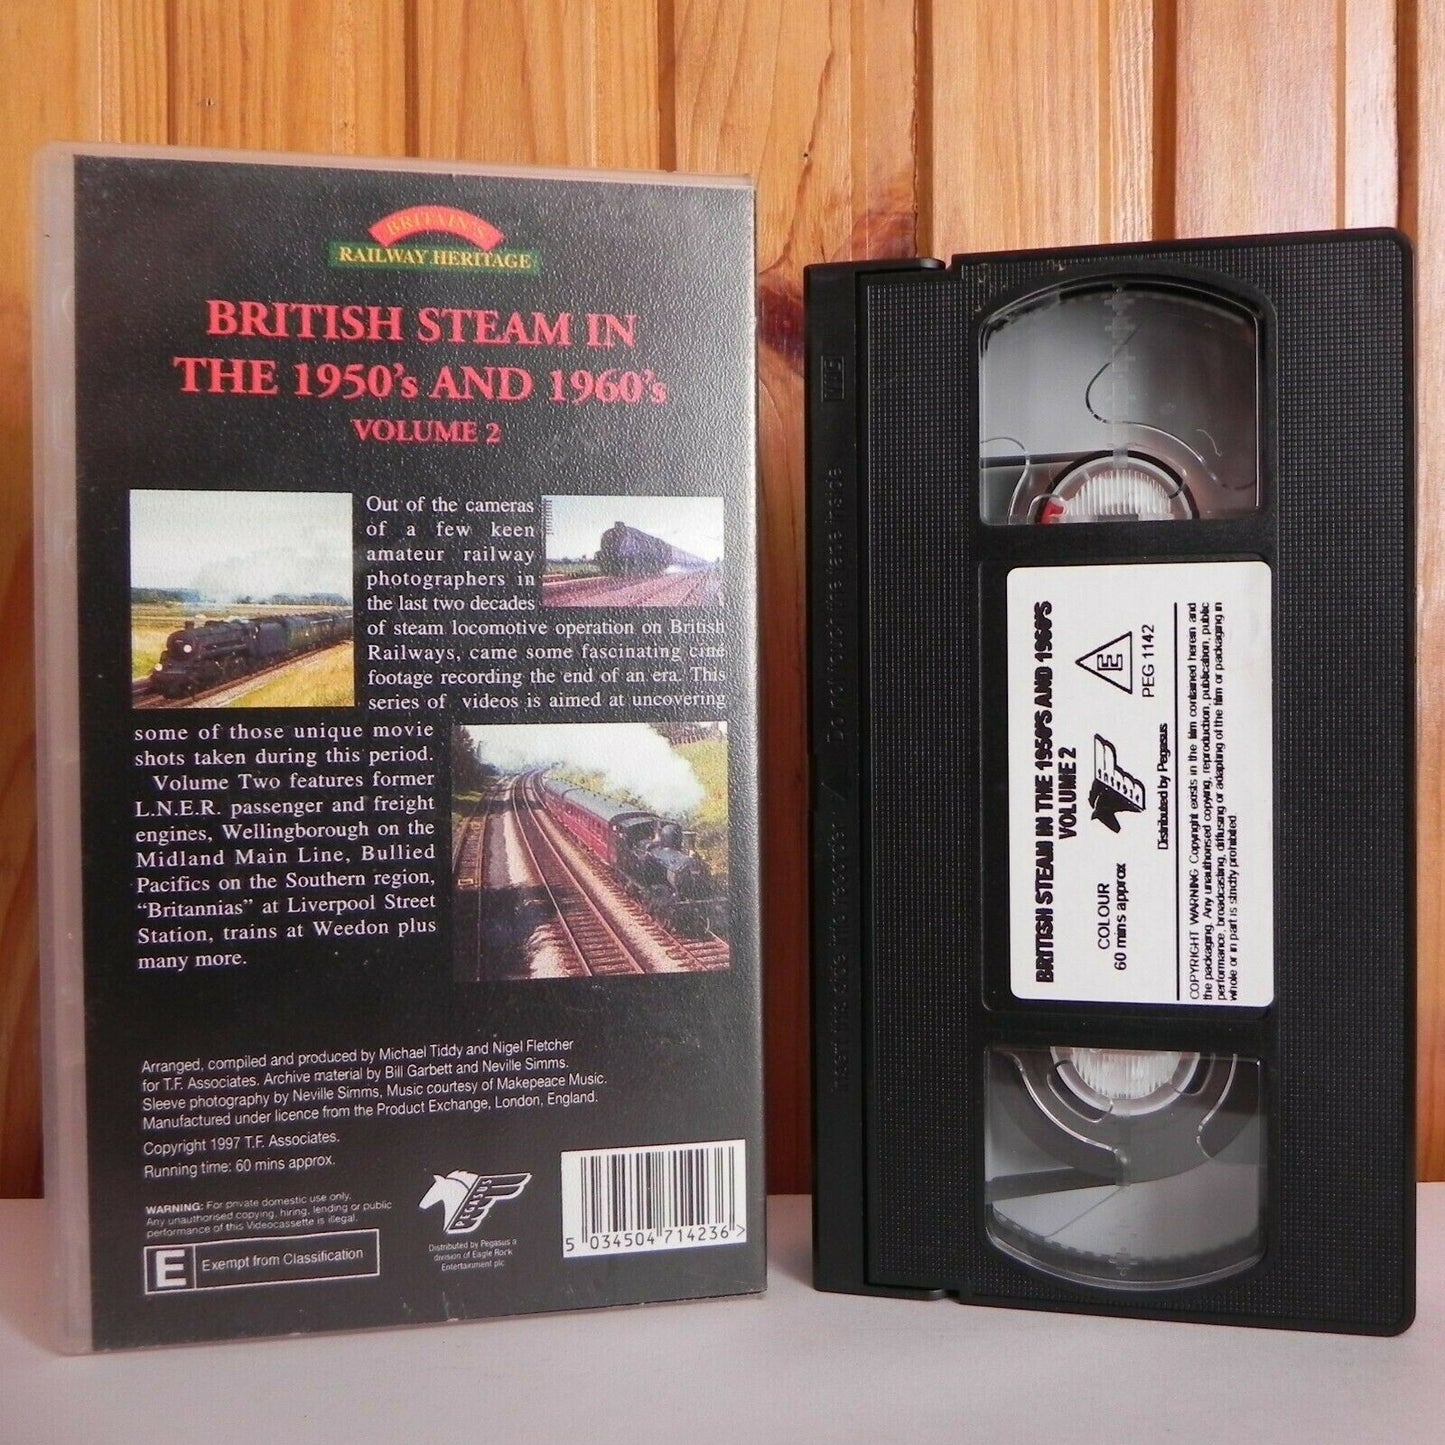 British Steam In The 1950's And 1960's - Volume 2 - Railway Heritage - Pal VHS-